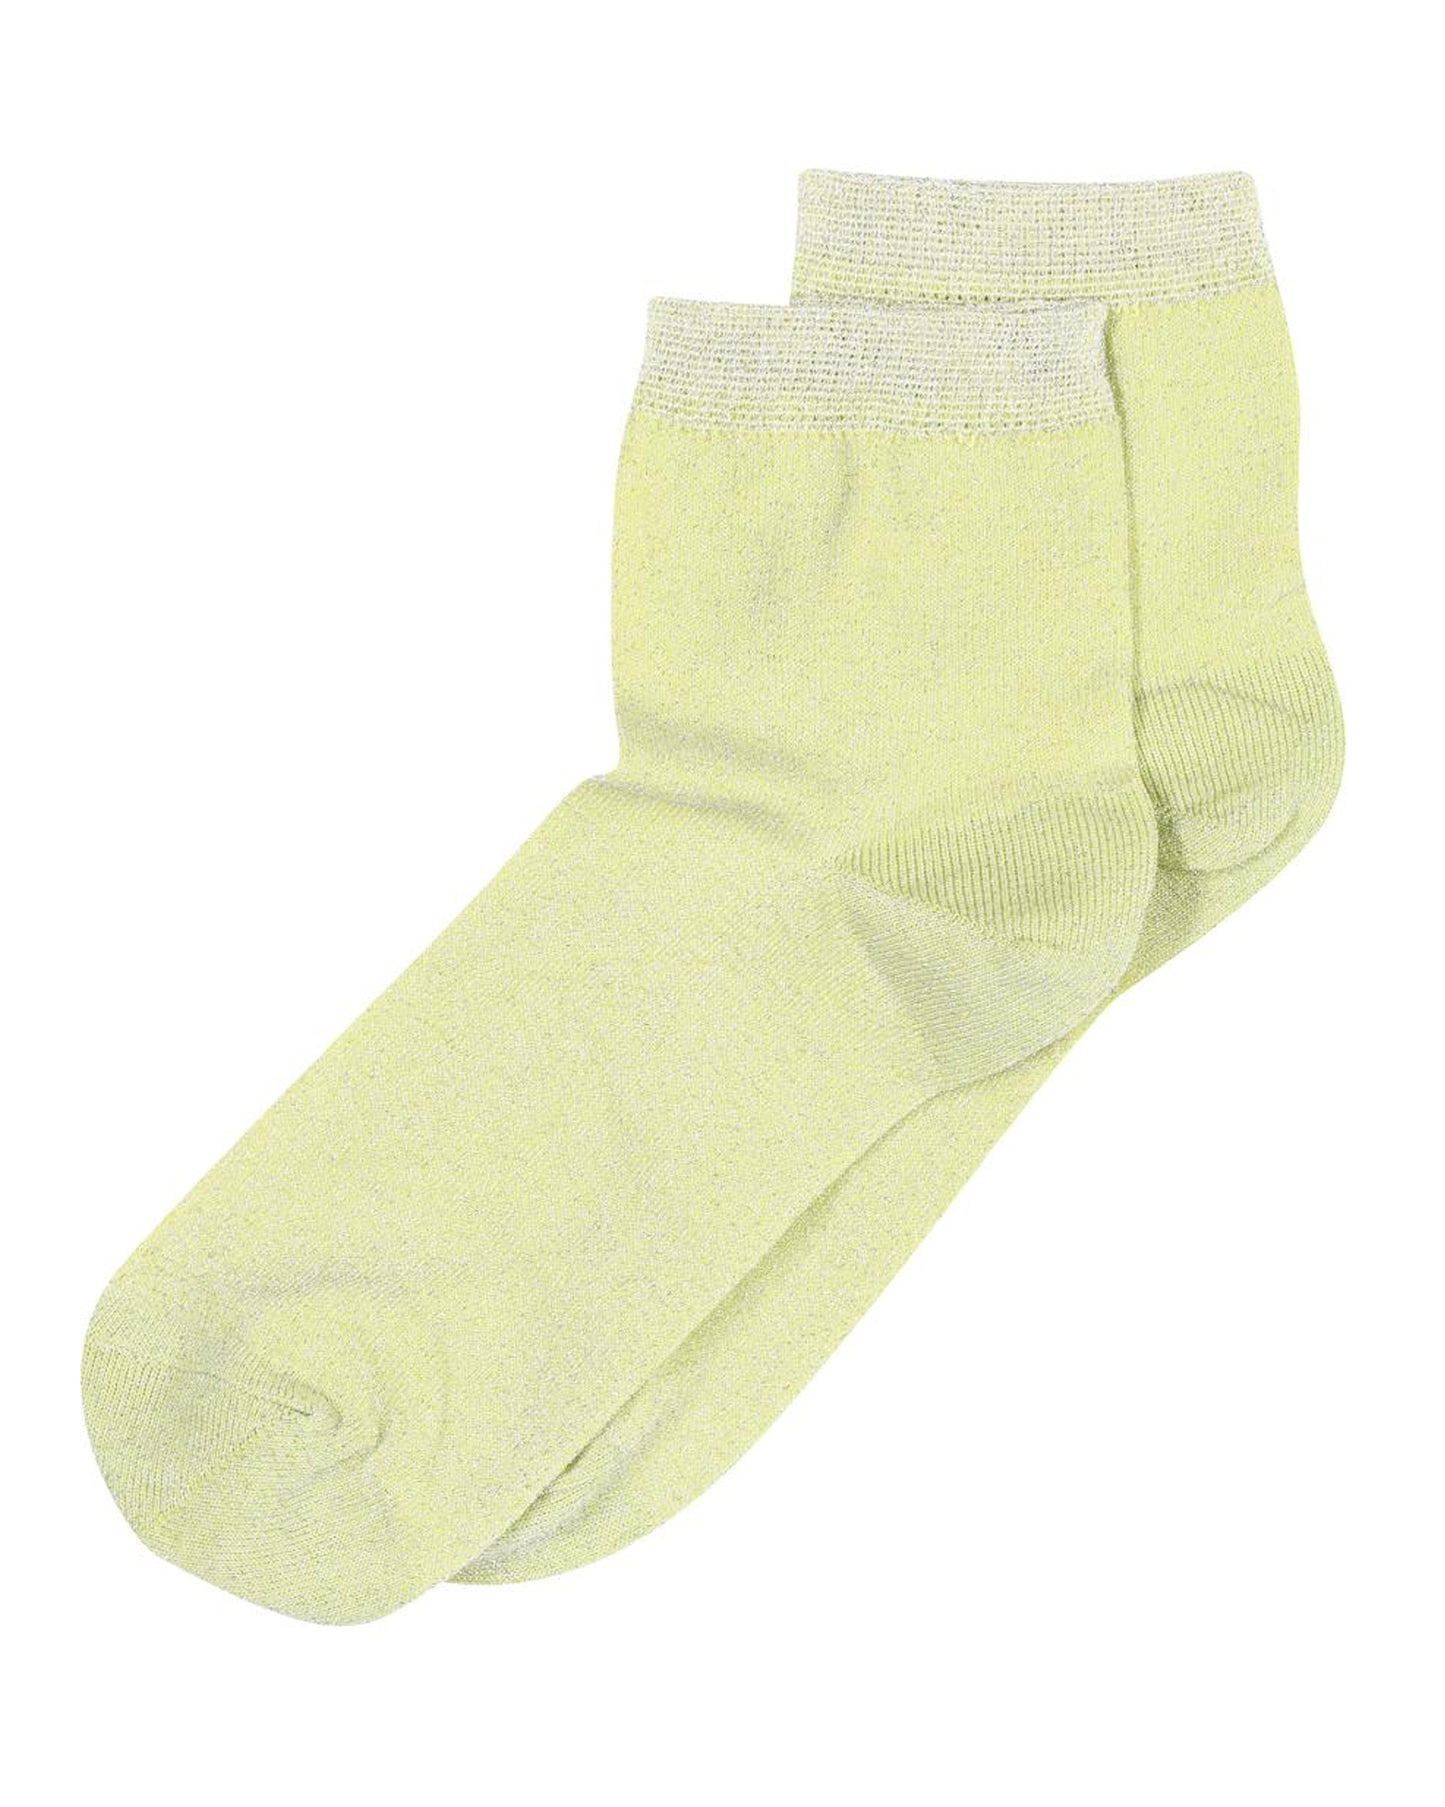 MP Denmark 77665 Pi Socks - Light pale lime green quarter high fashion ankle socks with sparkly lame through out, plain cuff, shaped heel and flat toe seam.